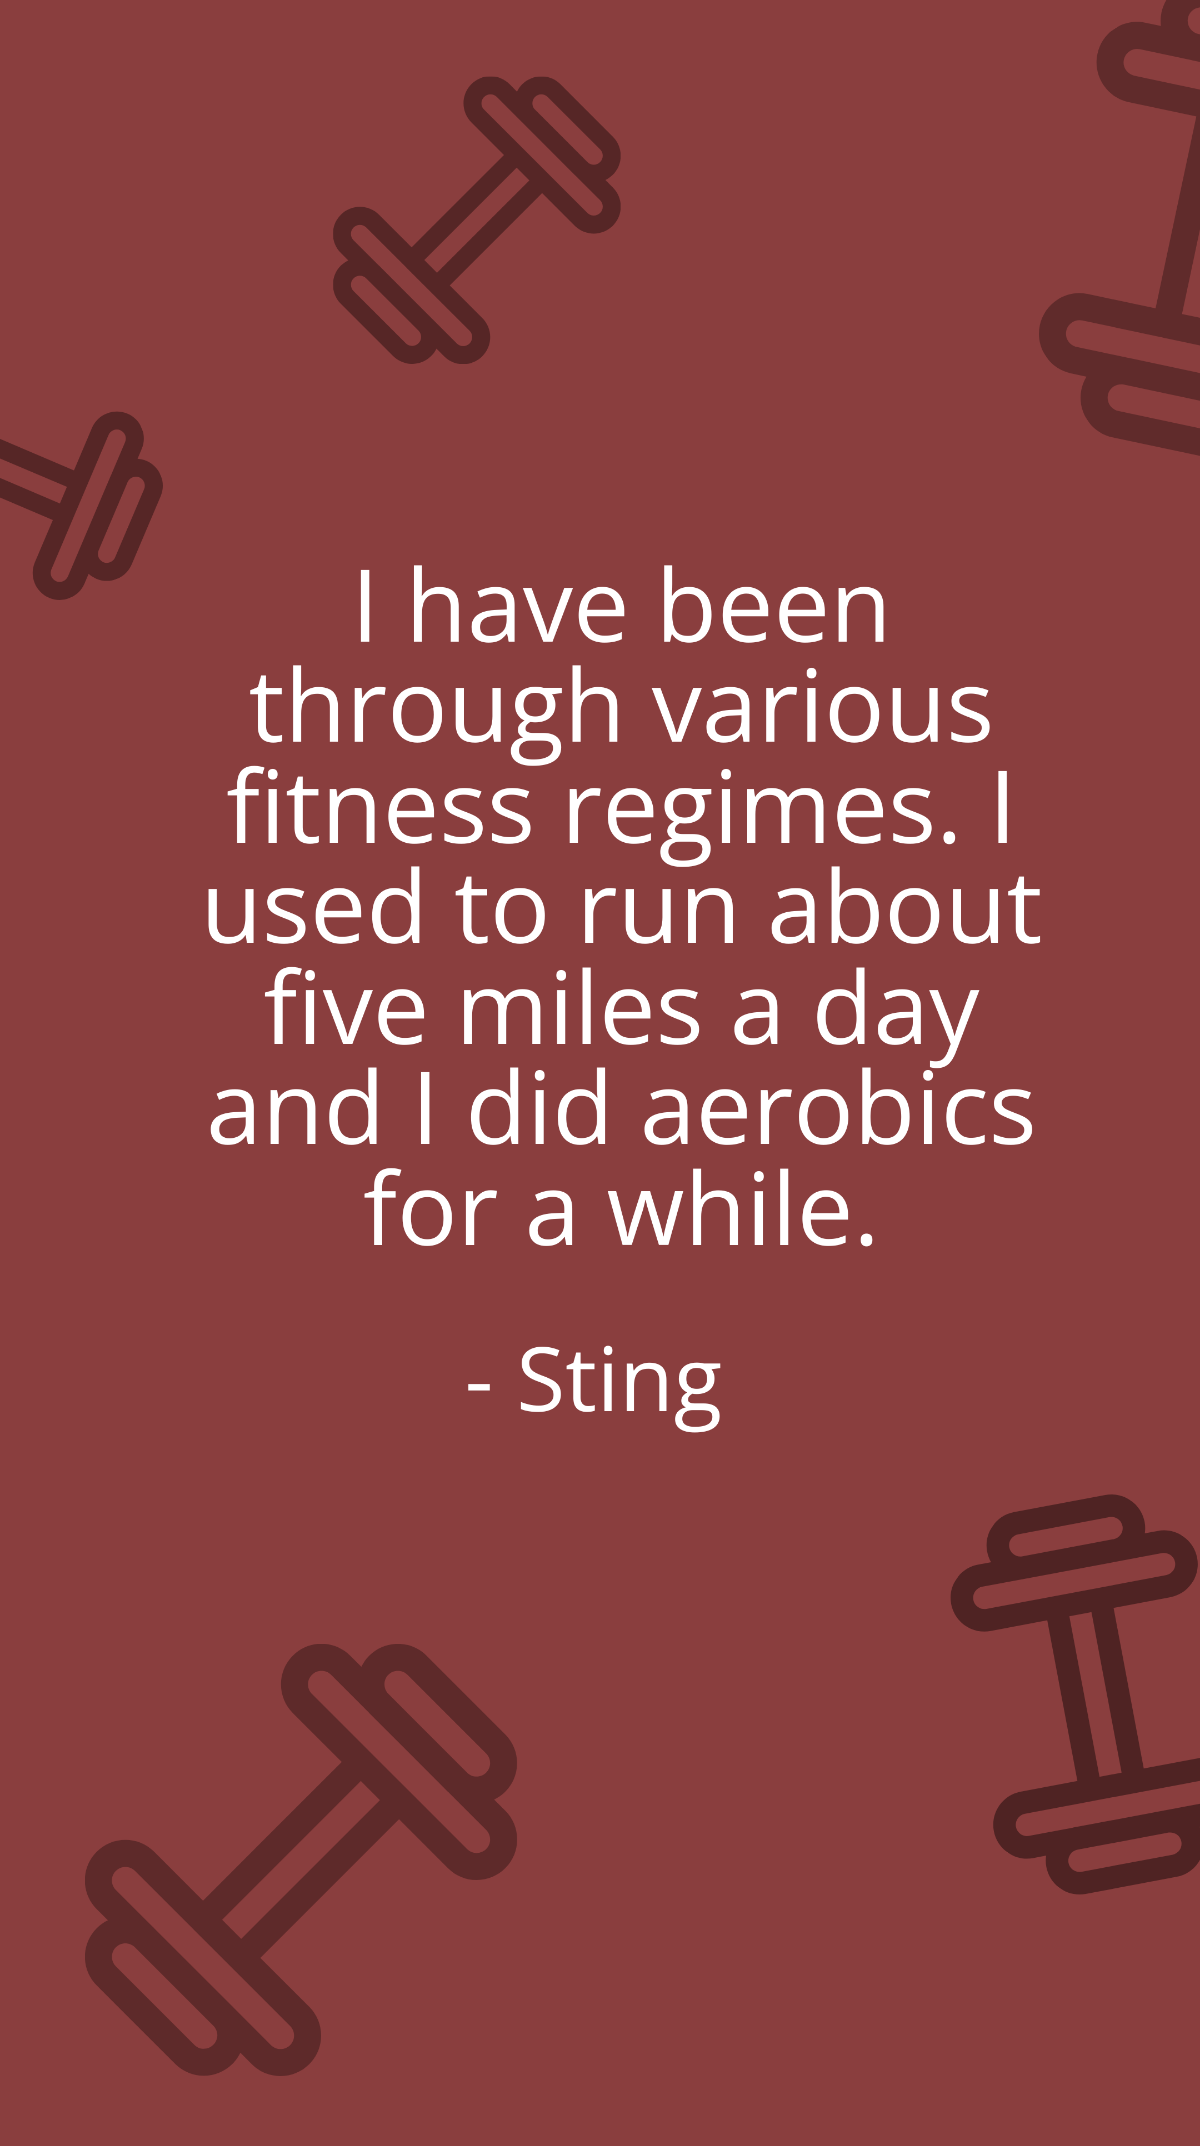 Sting - I have been through various fitness regimes. I used to run about five miles a day and I did aerobics for a while.